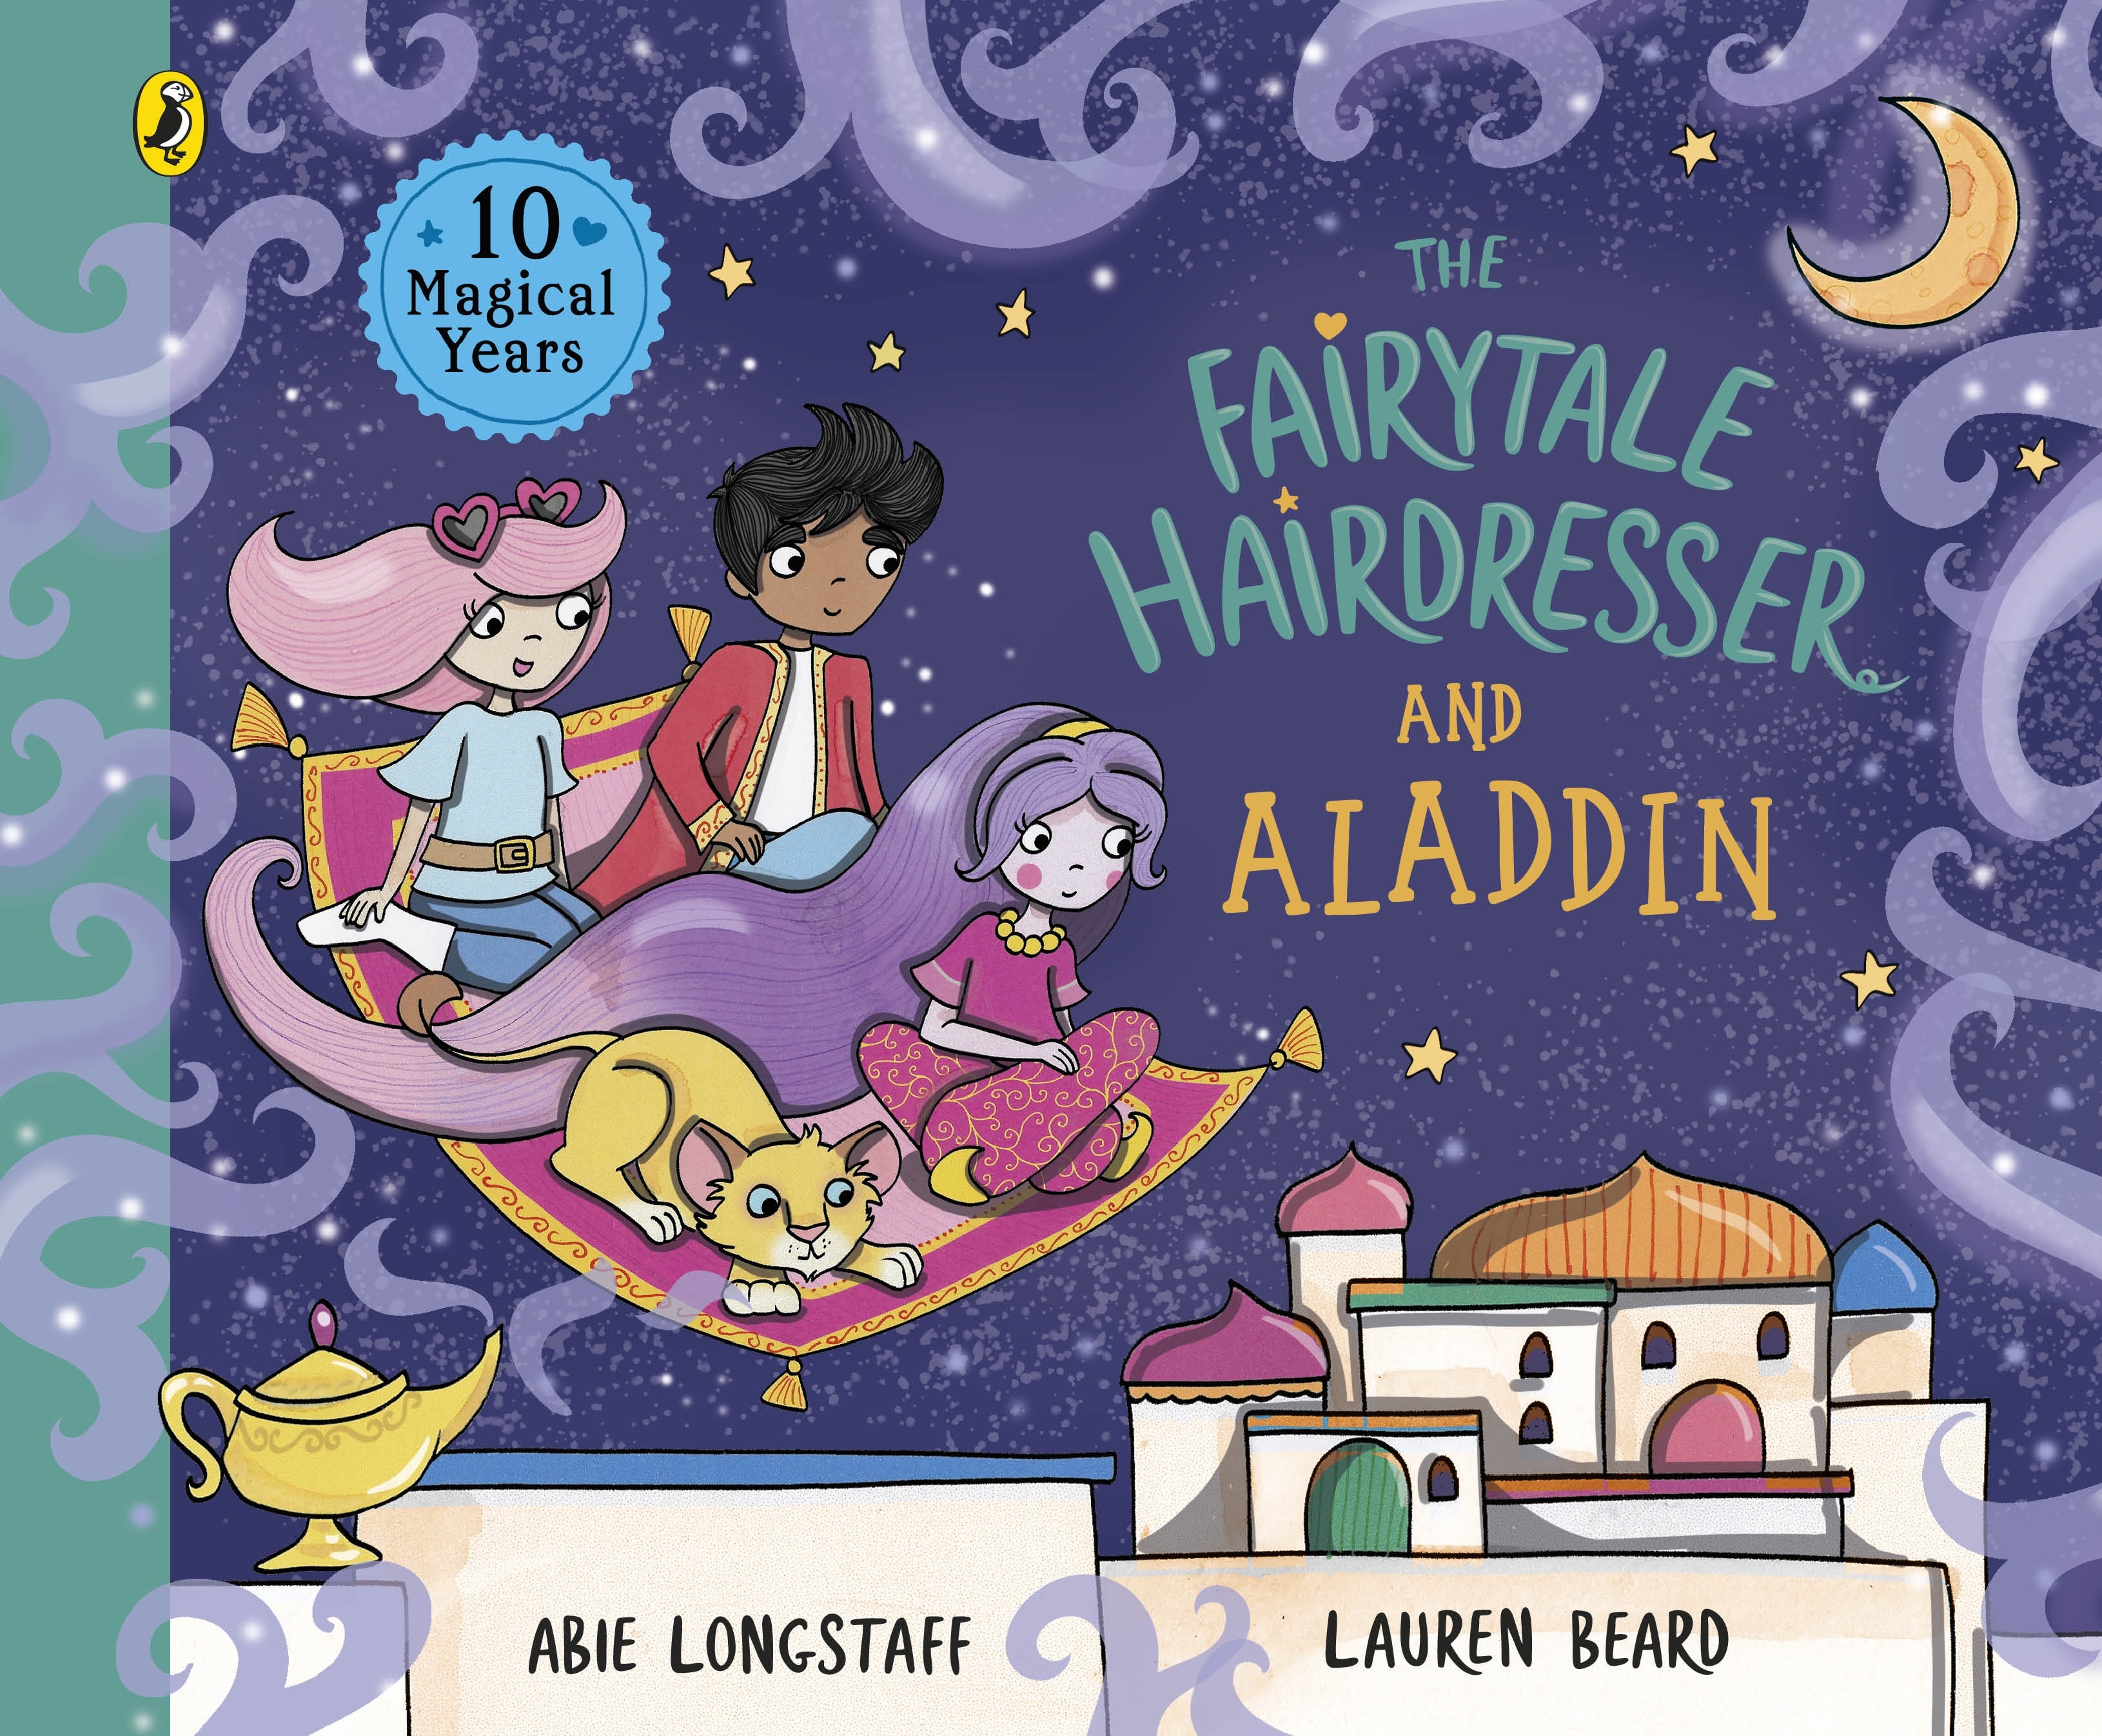 Book “The Fairytale Hairdresser and Aladdin” by Abie Longstaff — June 2, 2022